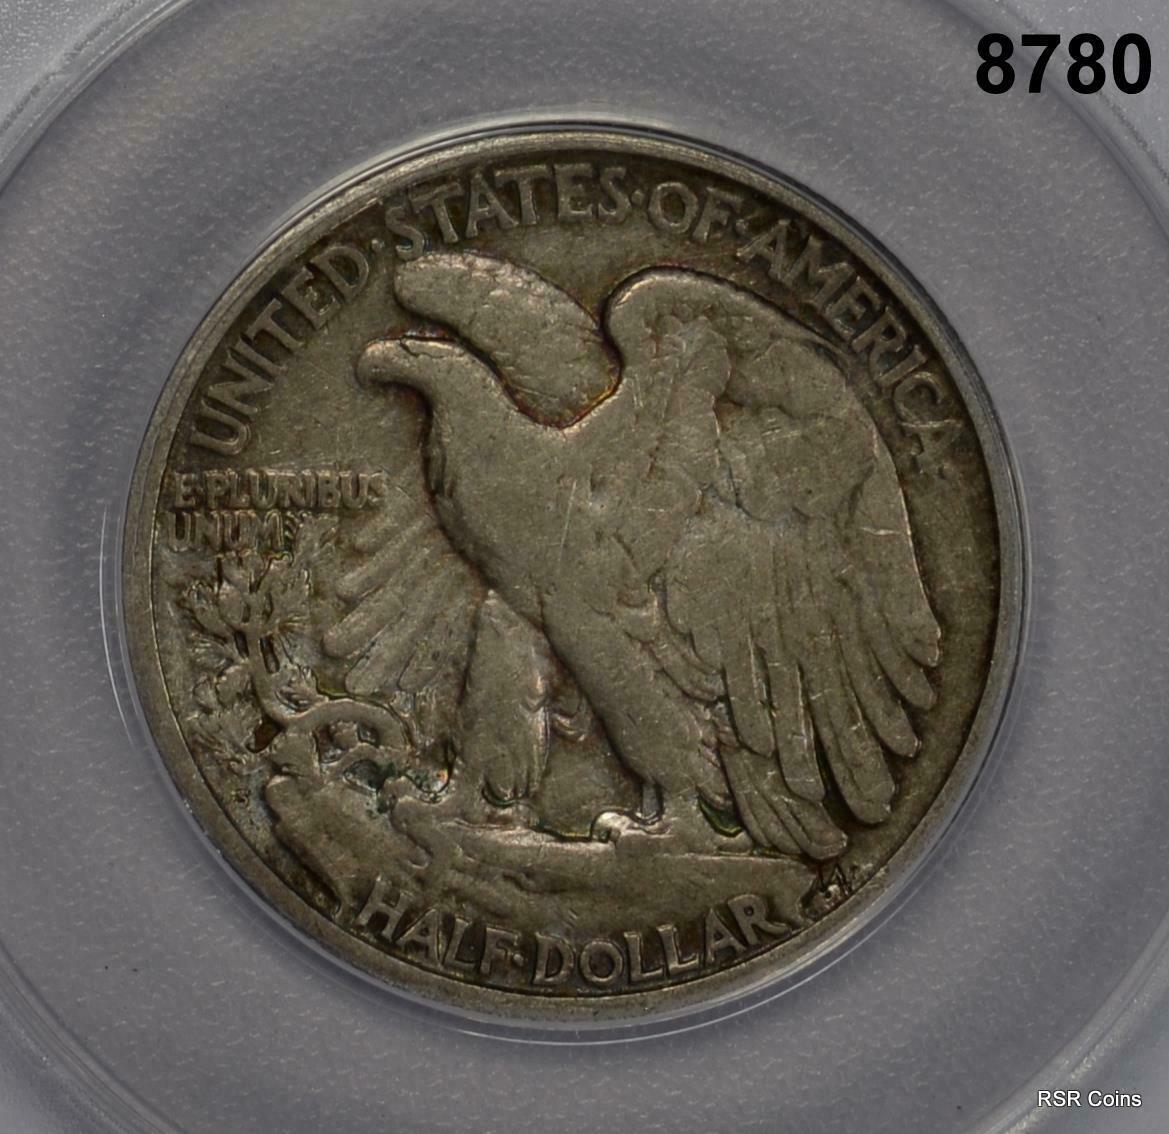 1920 S WALKING LIBERTY HALF DOLLAR ANACS CERTIFIED VF25 CORRODED CLEANED #8780